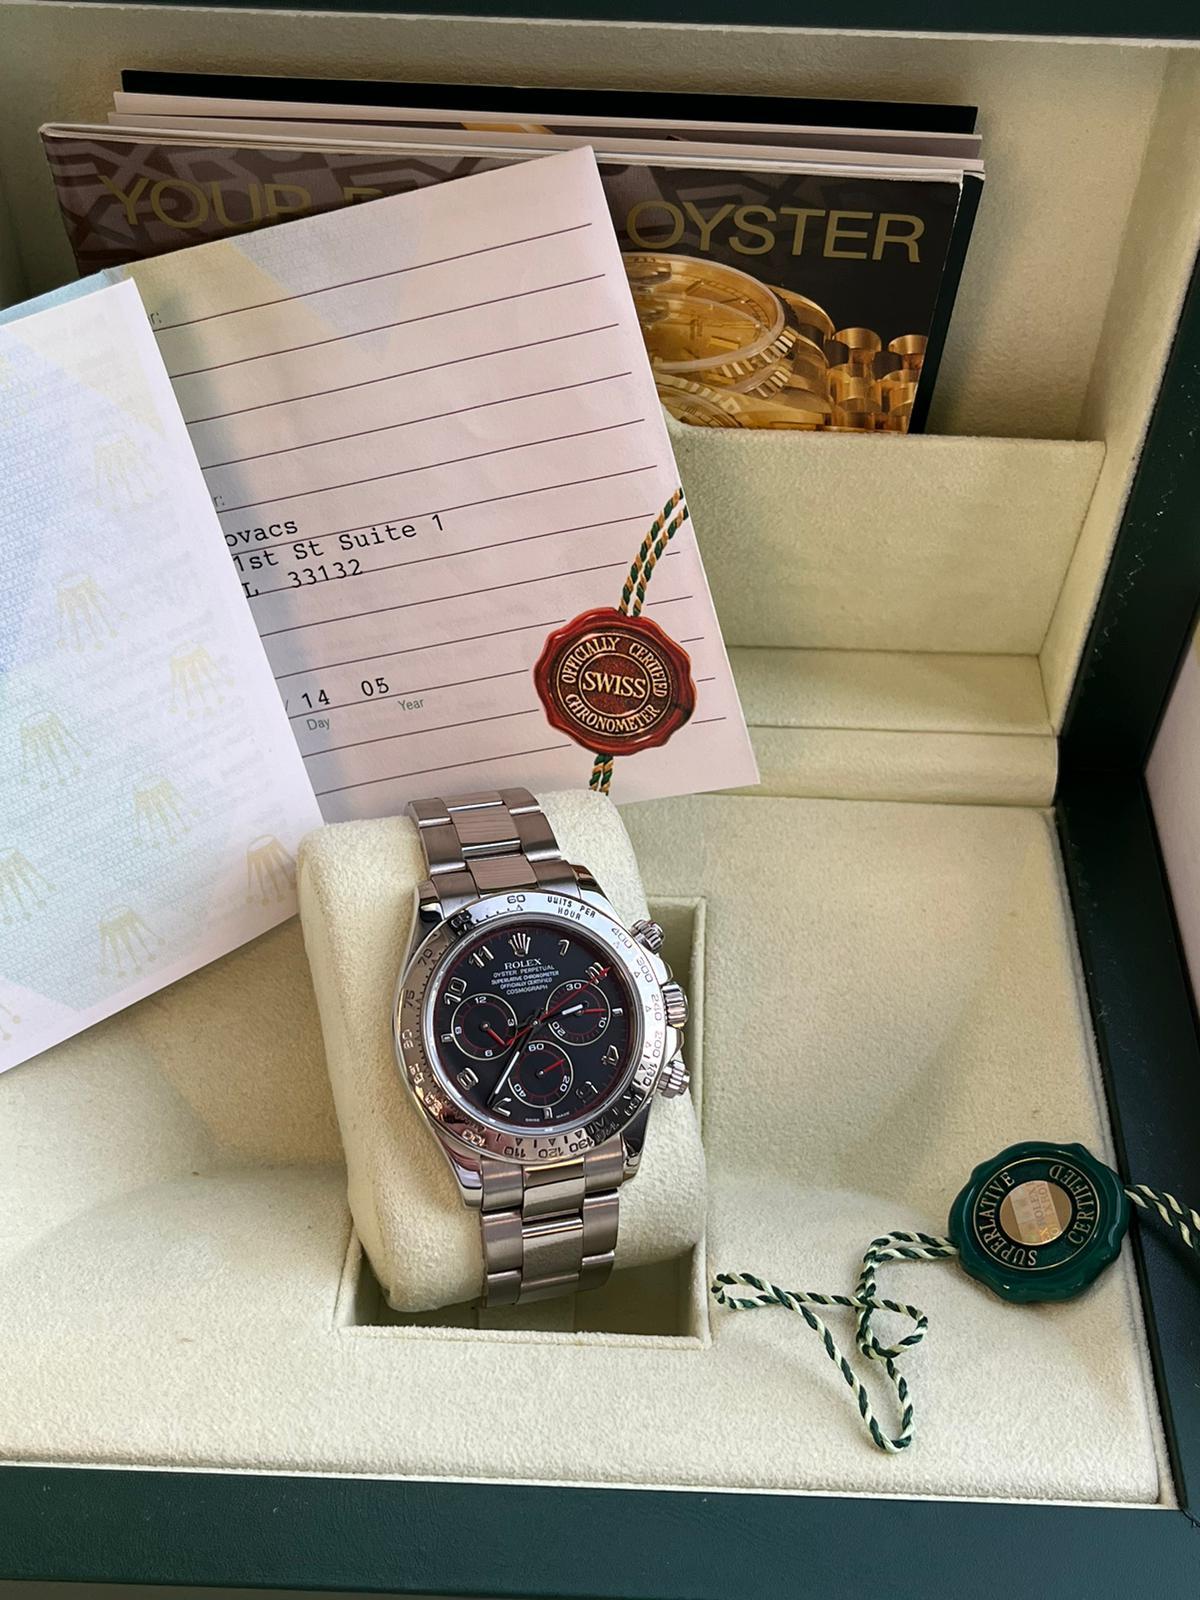 Rolex Daytona Cosmograph Black Racing Dial White Gold Mens Watch 116509 In Good Condition For Sale In Aventura, FL